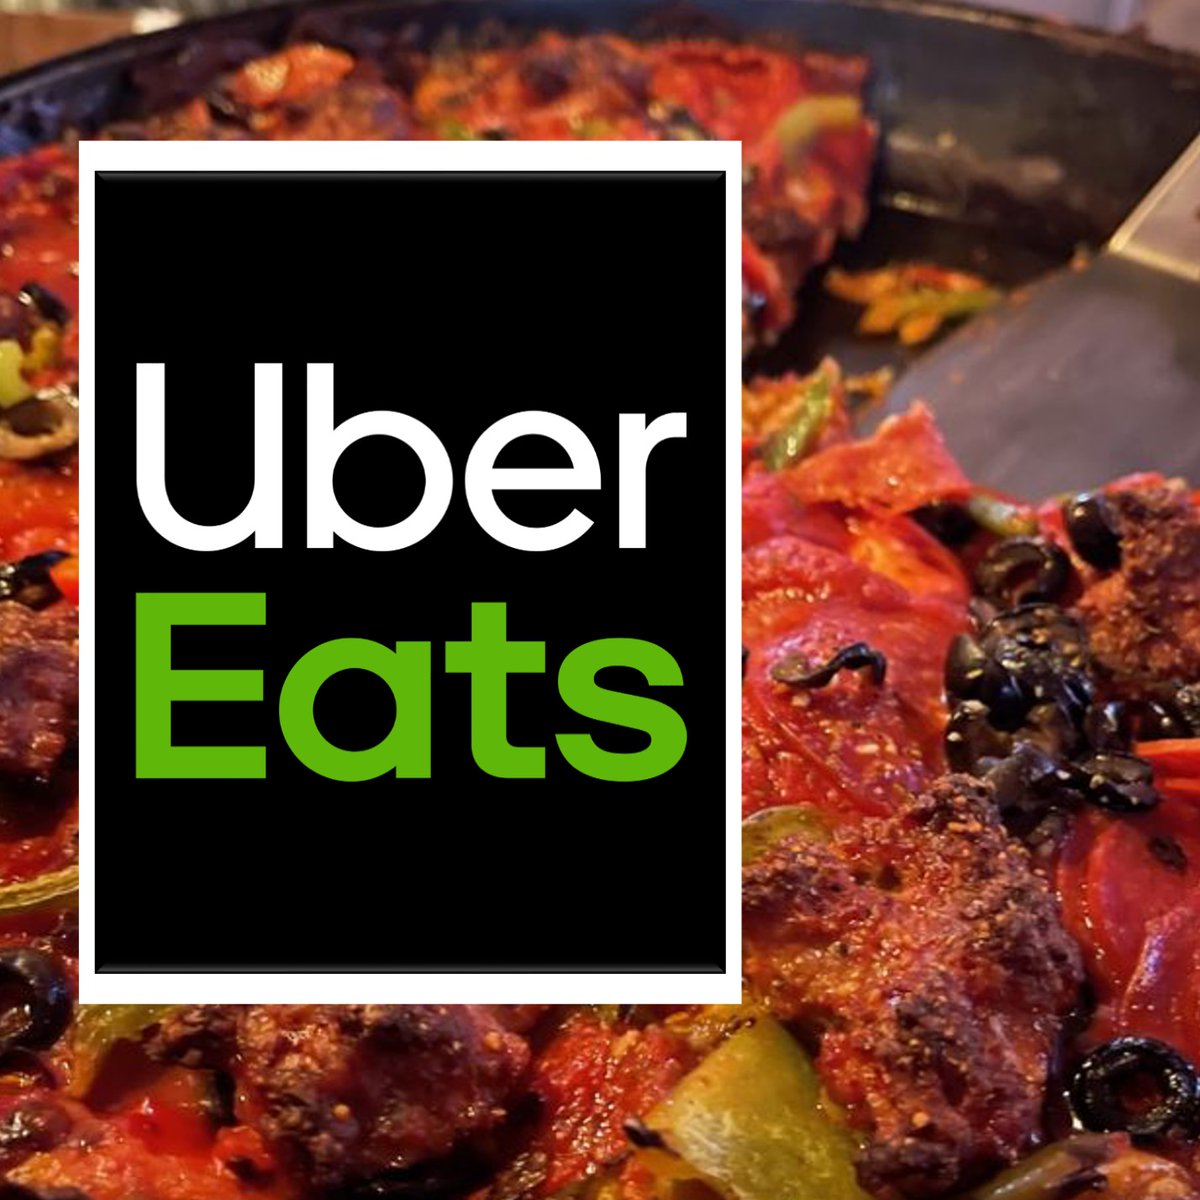 We’re now on @UberEats! You can save $5 off your next order of $25+ before 5/31 with code: welcometoeatspequods